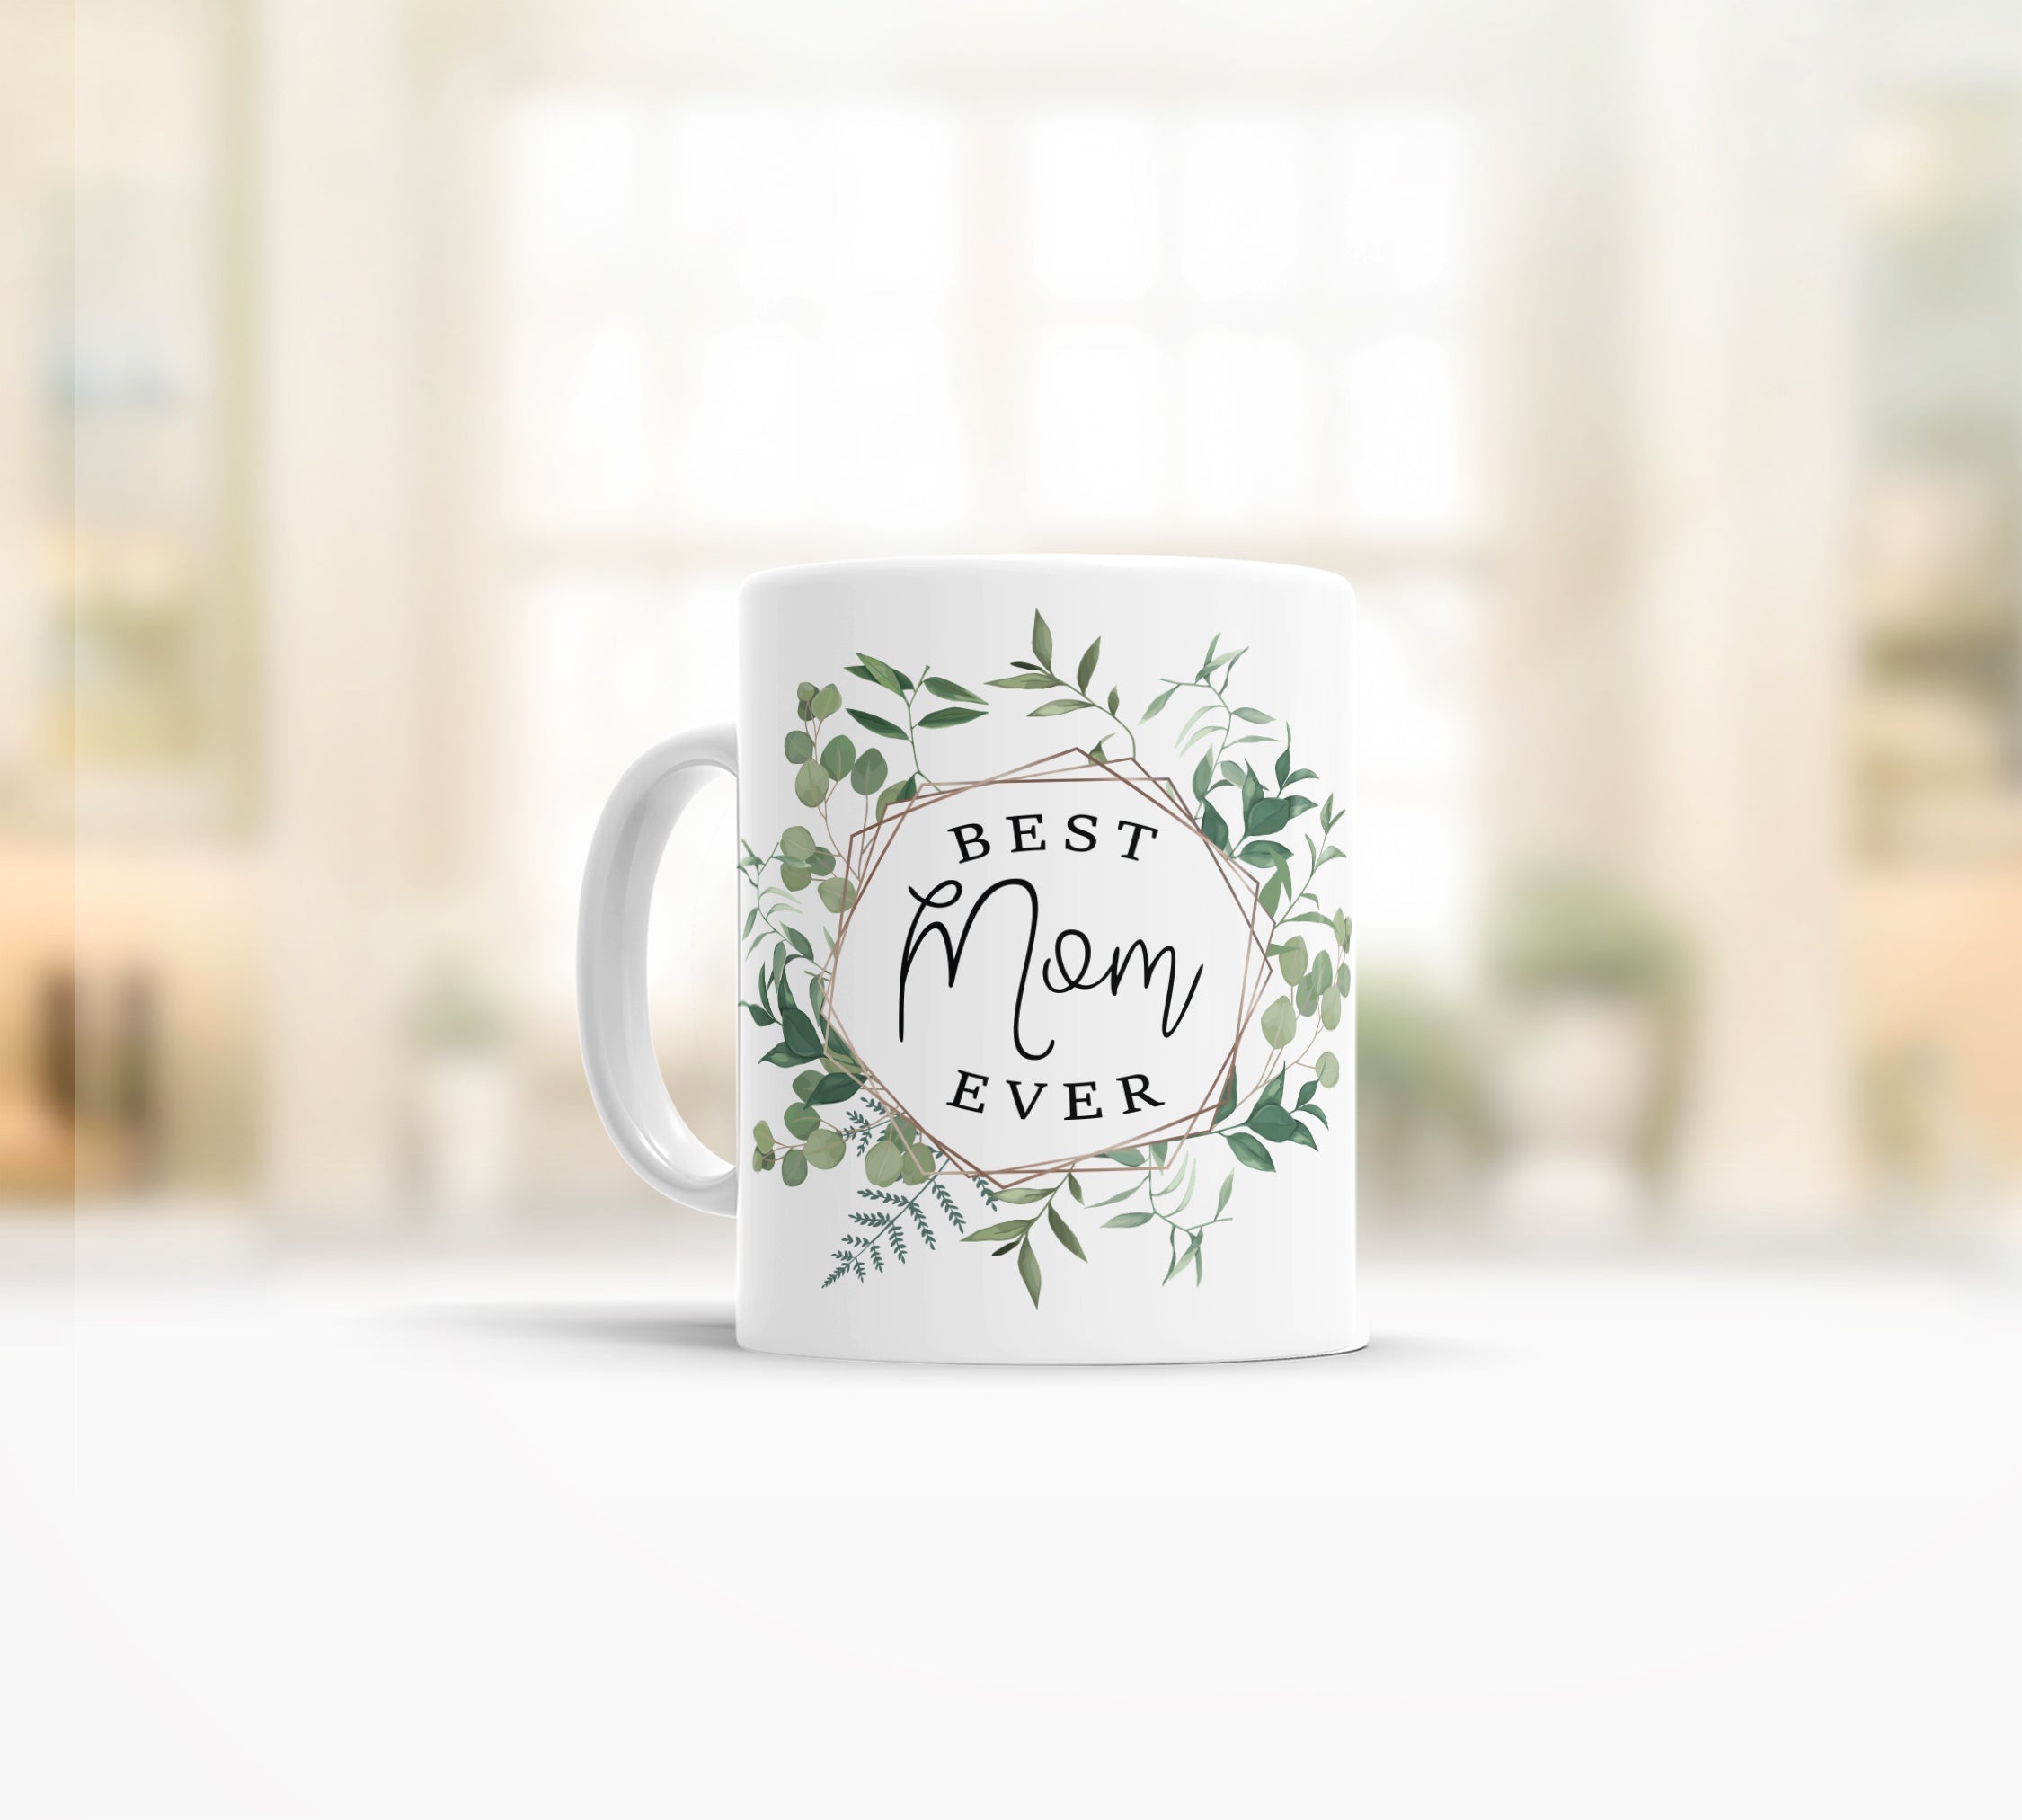 Best Mom Ever Coffee Mug Cup, for Birthday, Mother's Day